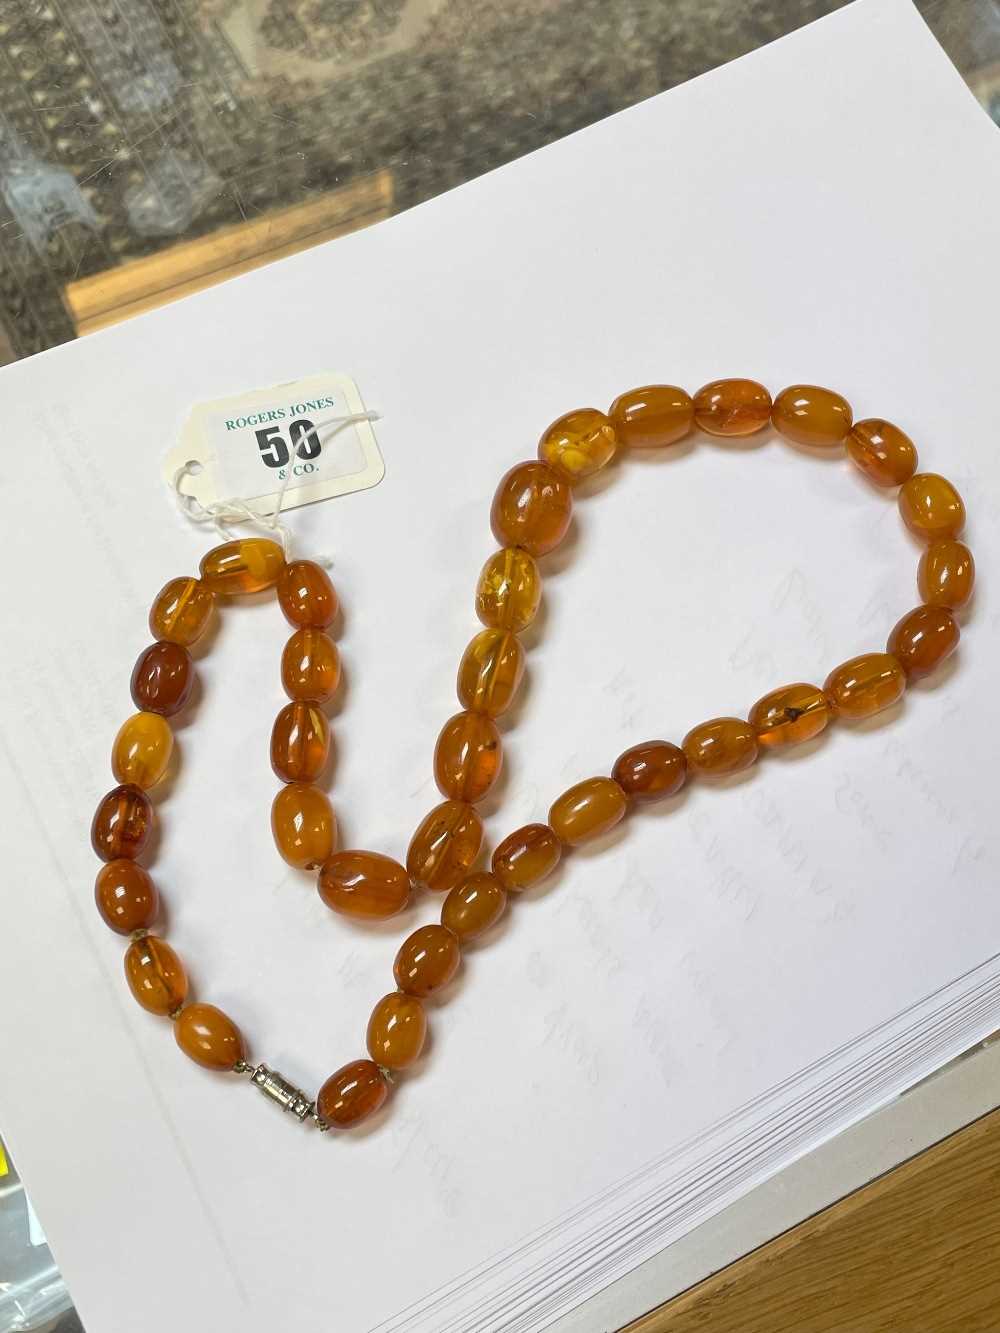 SINGLE STRAND AMBER BEAD NECKLACE, beads 13mm to 20mm, approx gross wt. 55gms - Image 3 of 13